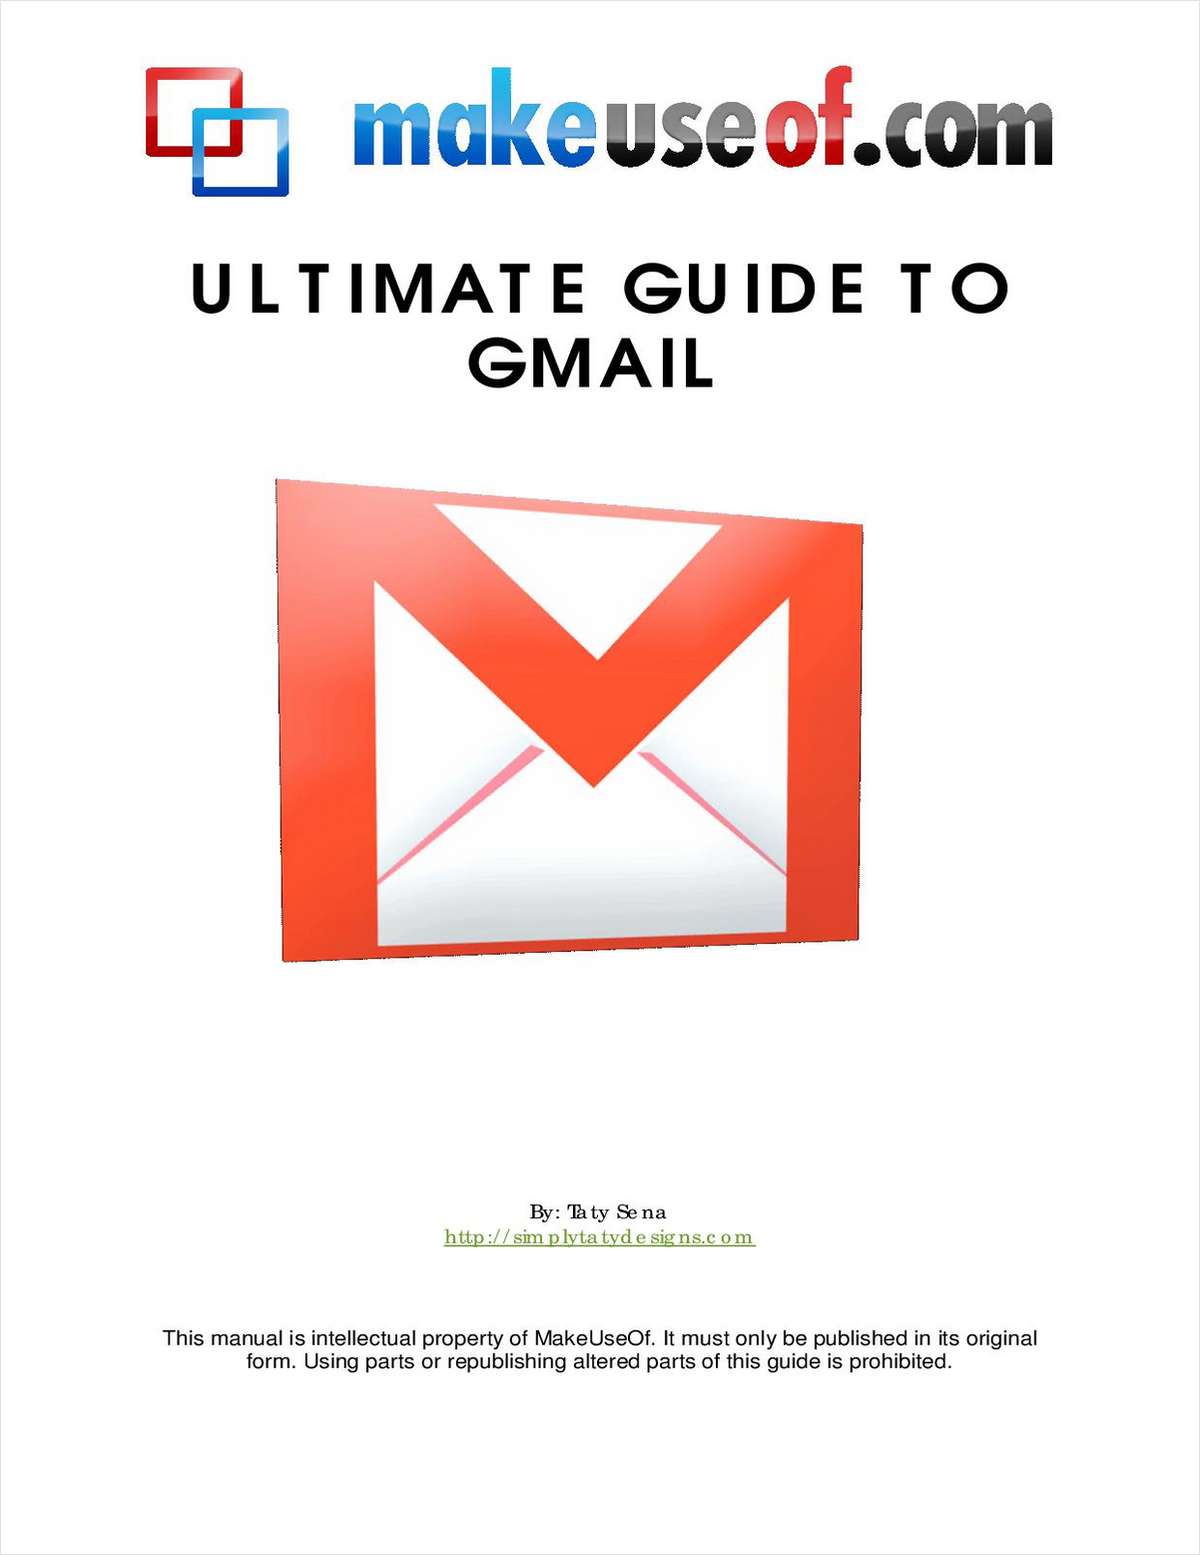 The Ultimate Guide to Gmail